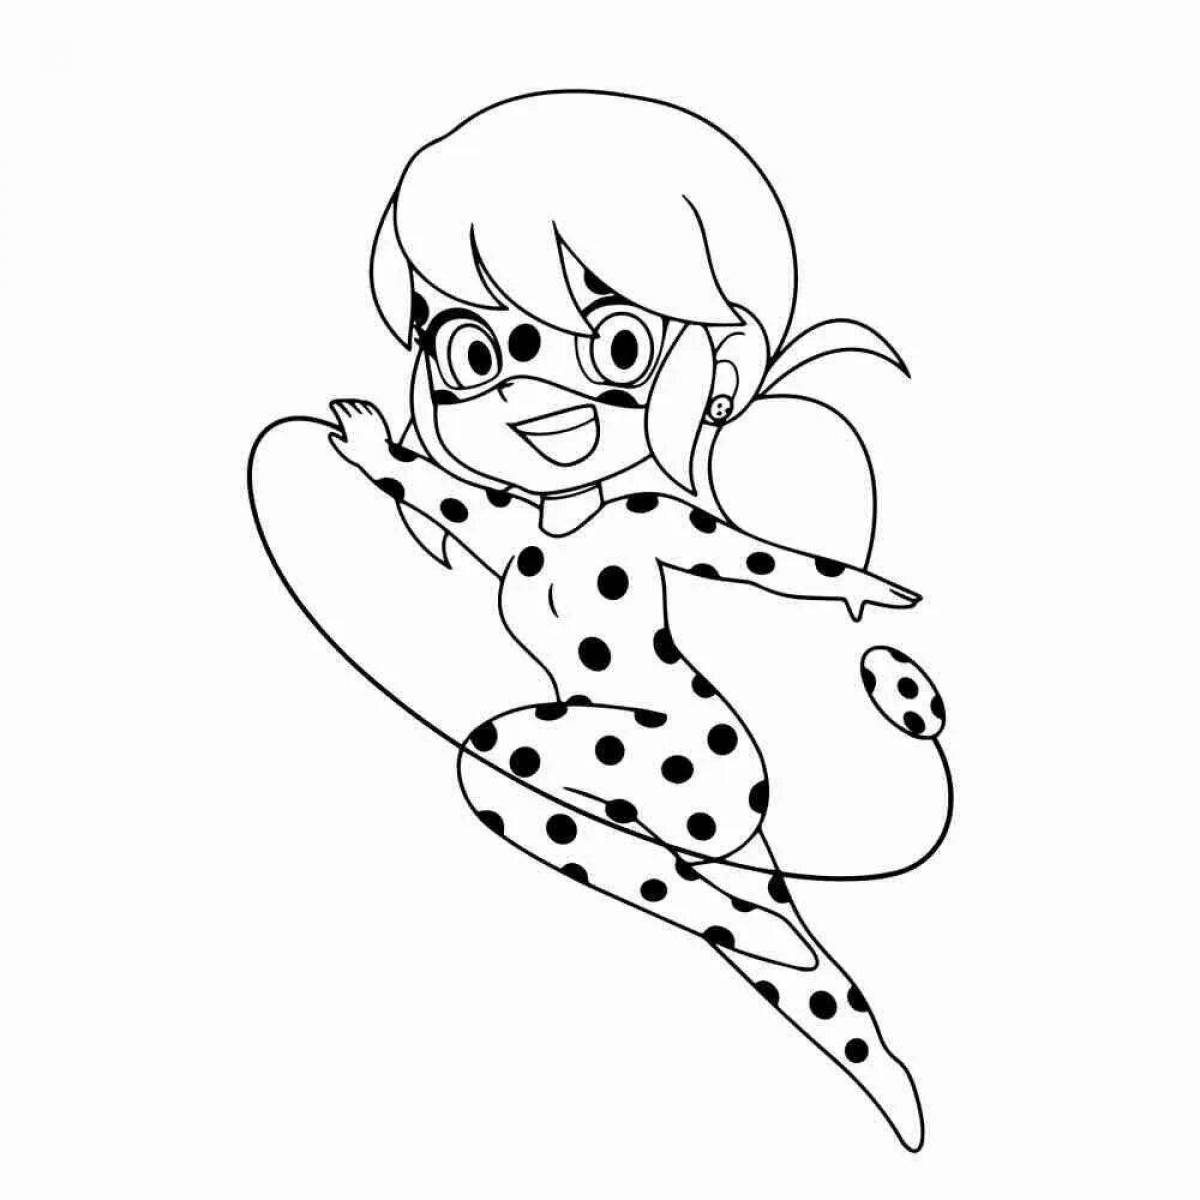 Cute ladybug and super cat coloring book